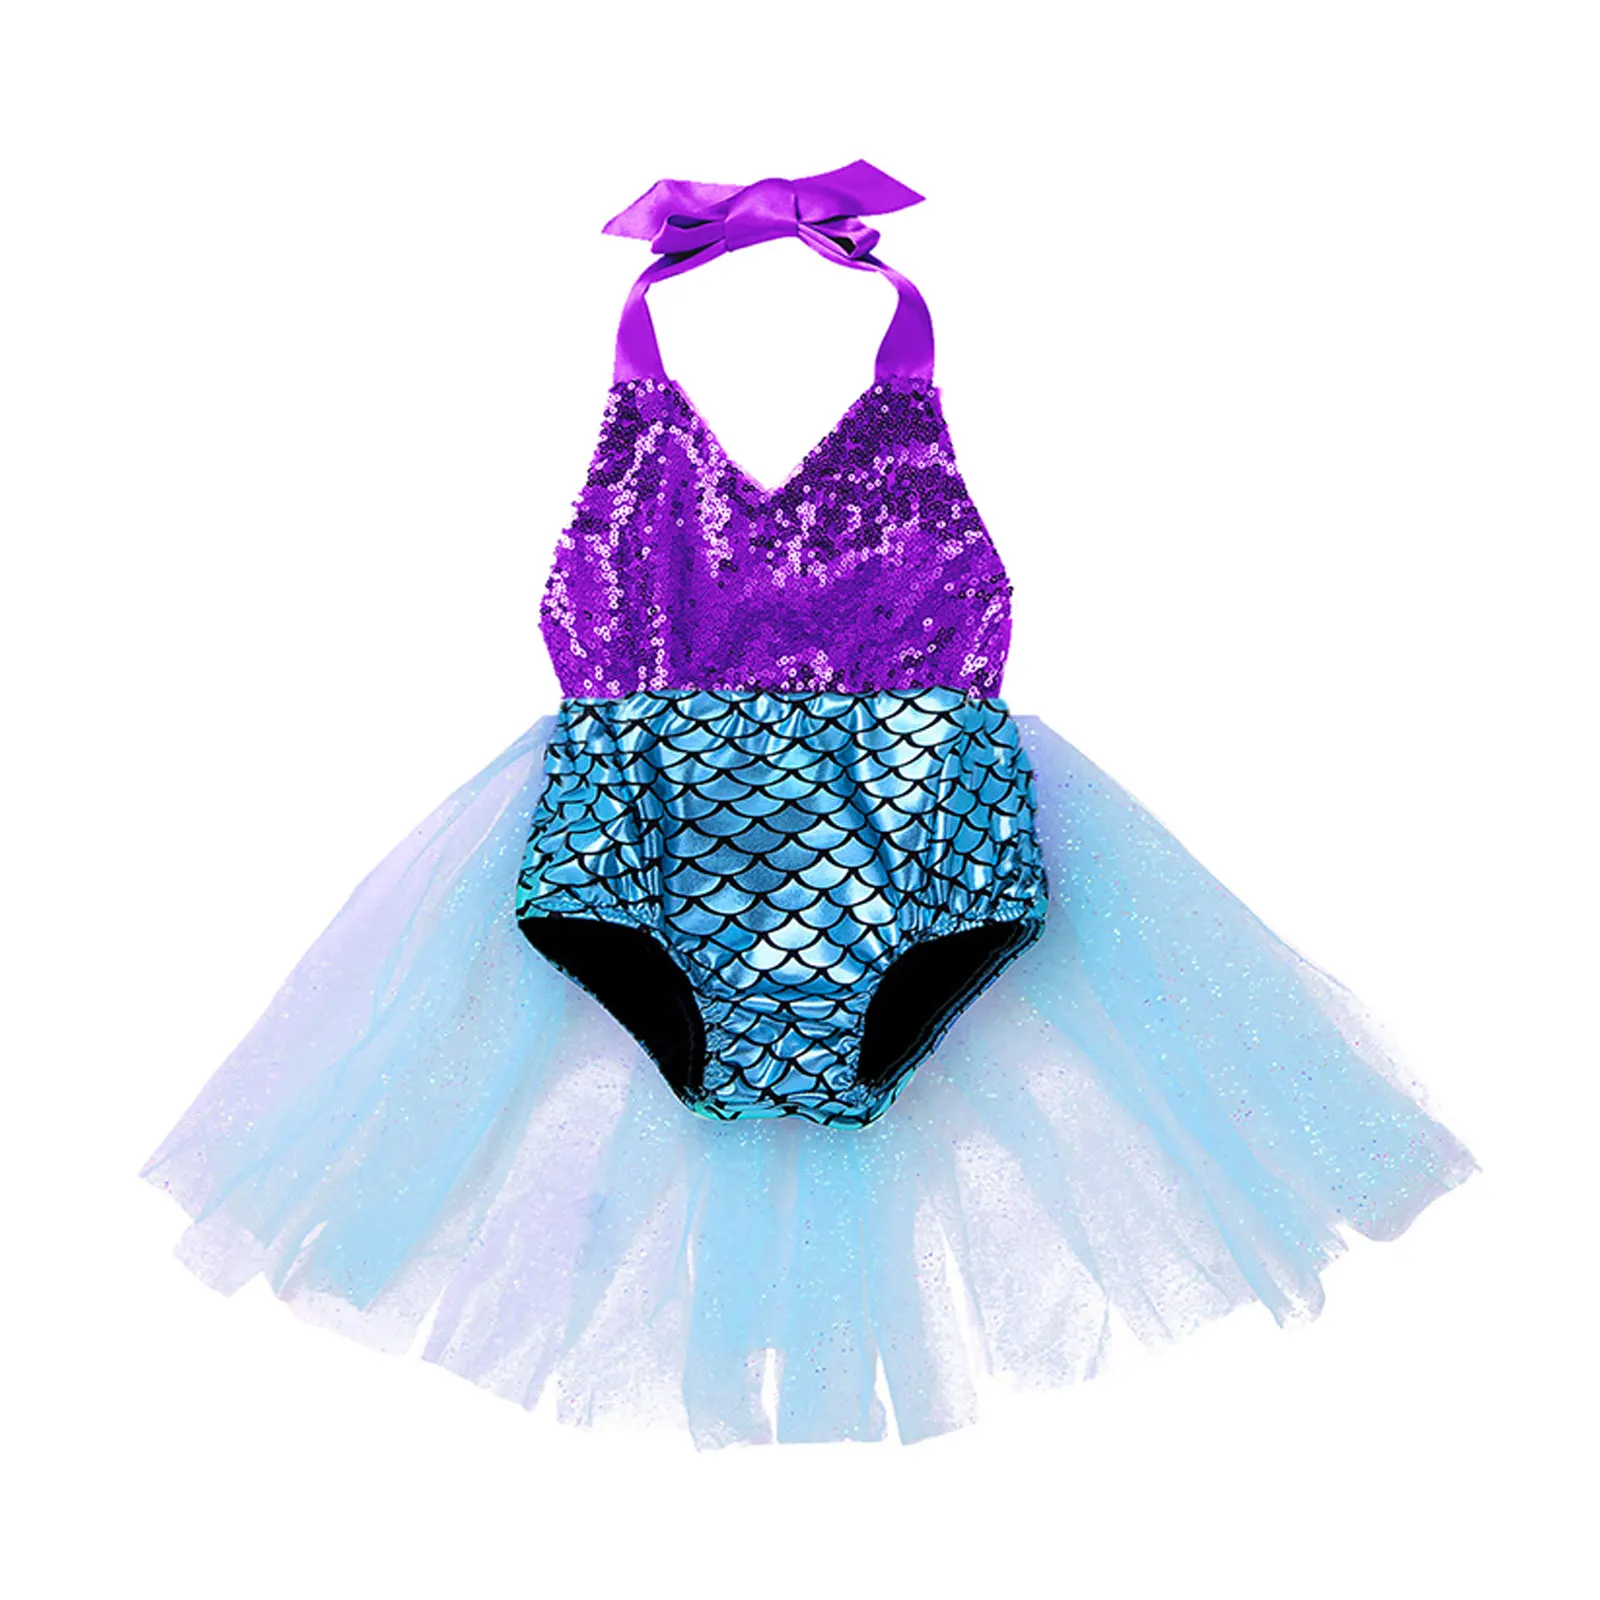 Newborn Sailor Romper Girls Boy Costume Anchor Mermaid Costume Newborn Infant Baby Girls Sequins Mermaid Rompers Jumpsuit Princess Mesh Tutu Dress Outfits Baby Girl Clothing Baby Bodysuits are cool